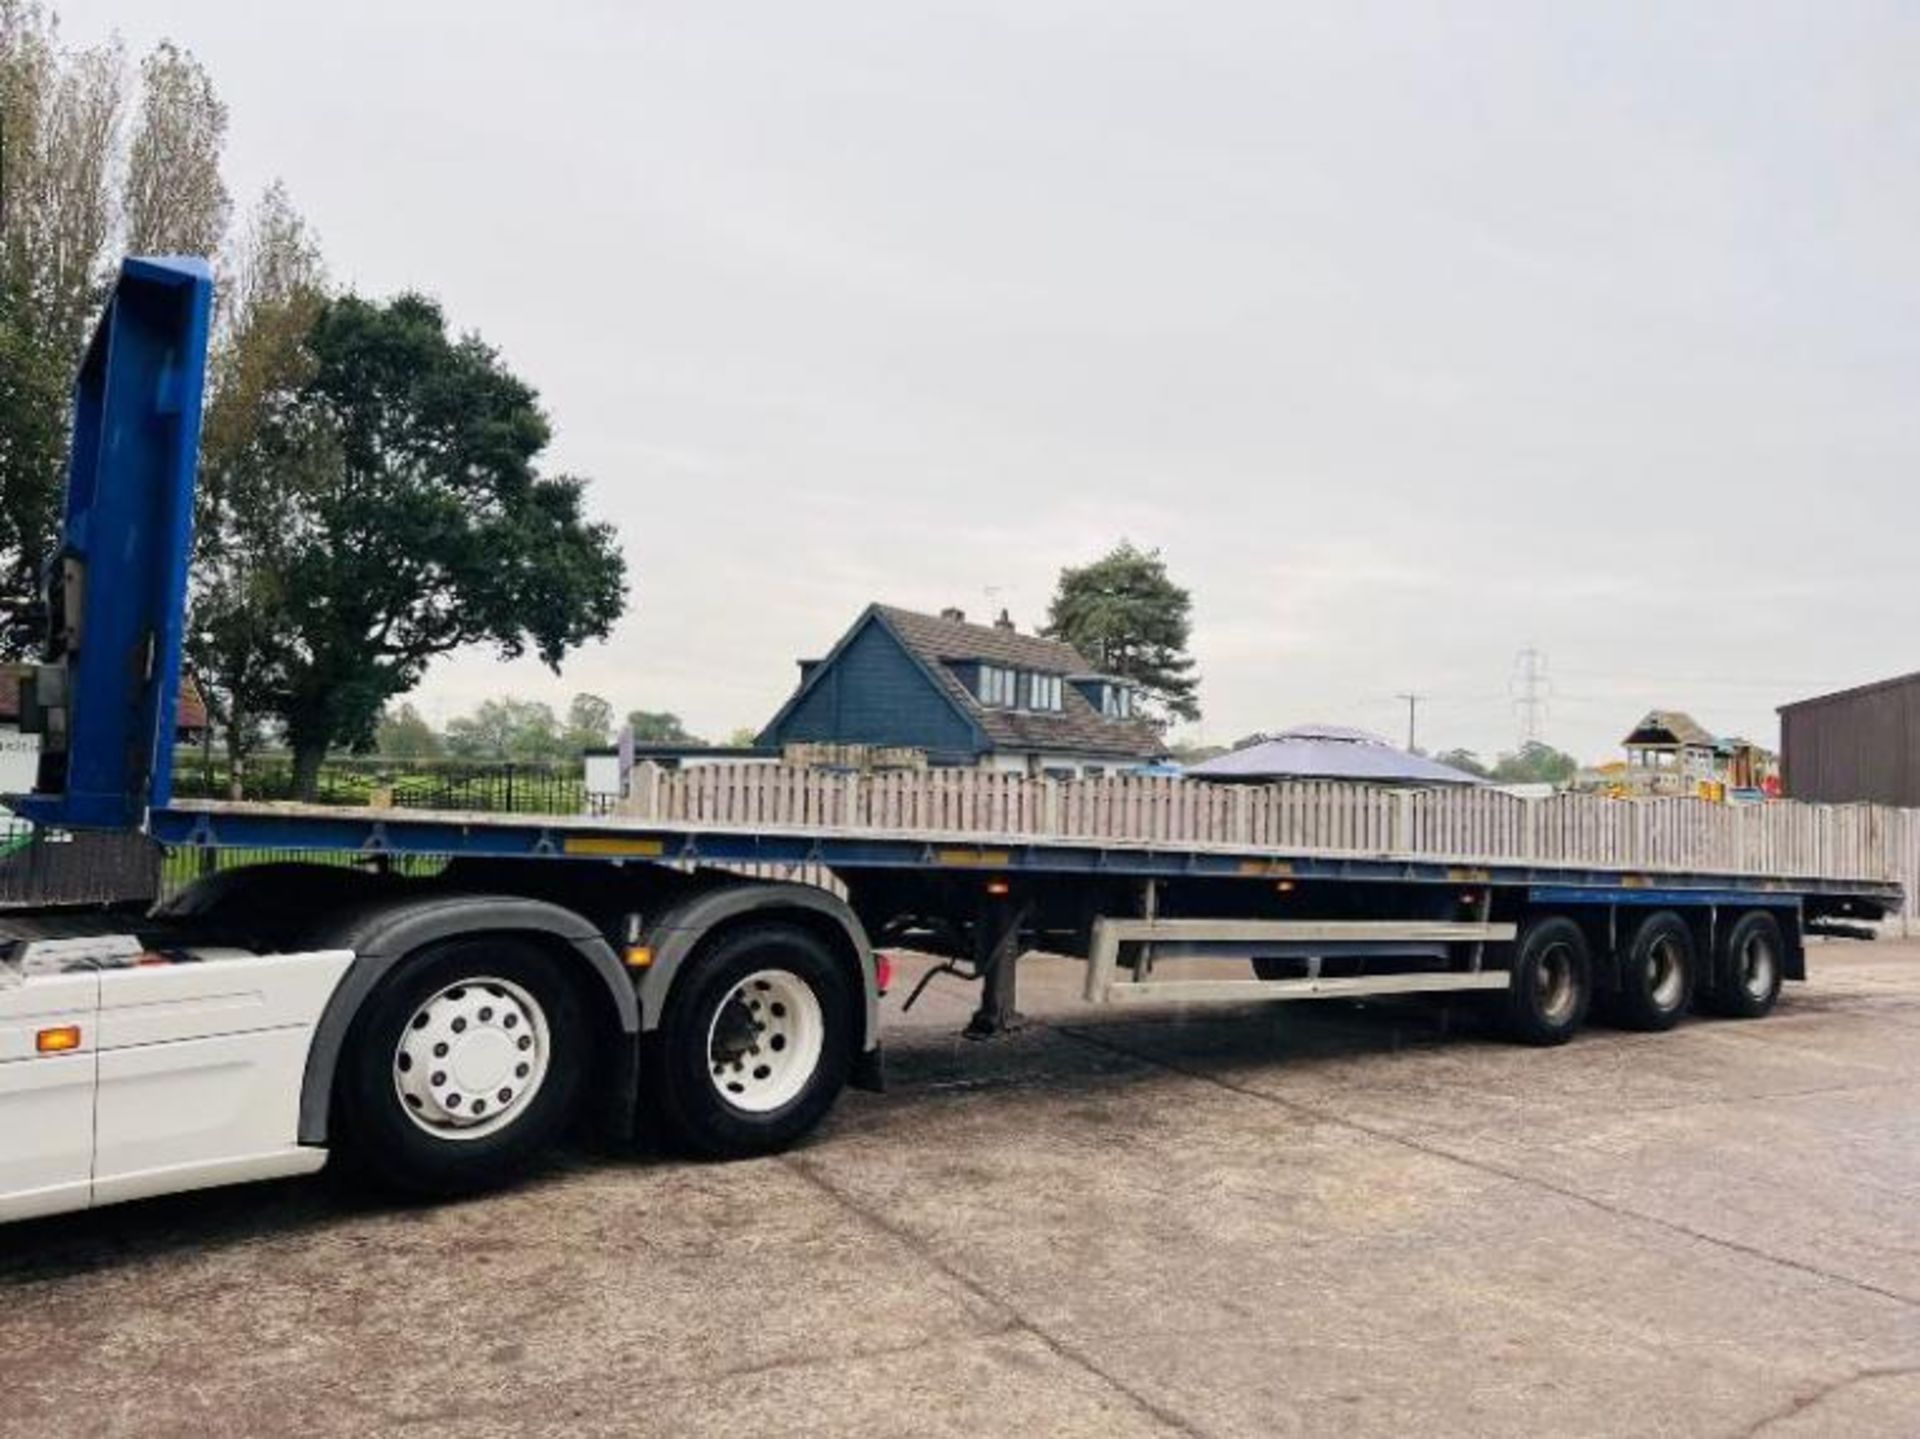 SDC 45 FOOT TRI-AXLE CONSTRUCTION SPEC FLAT BED TRAILER